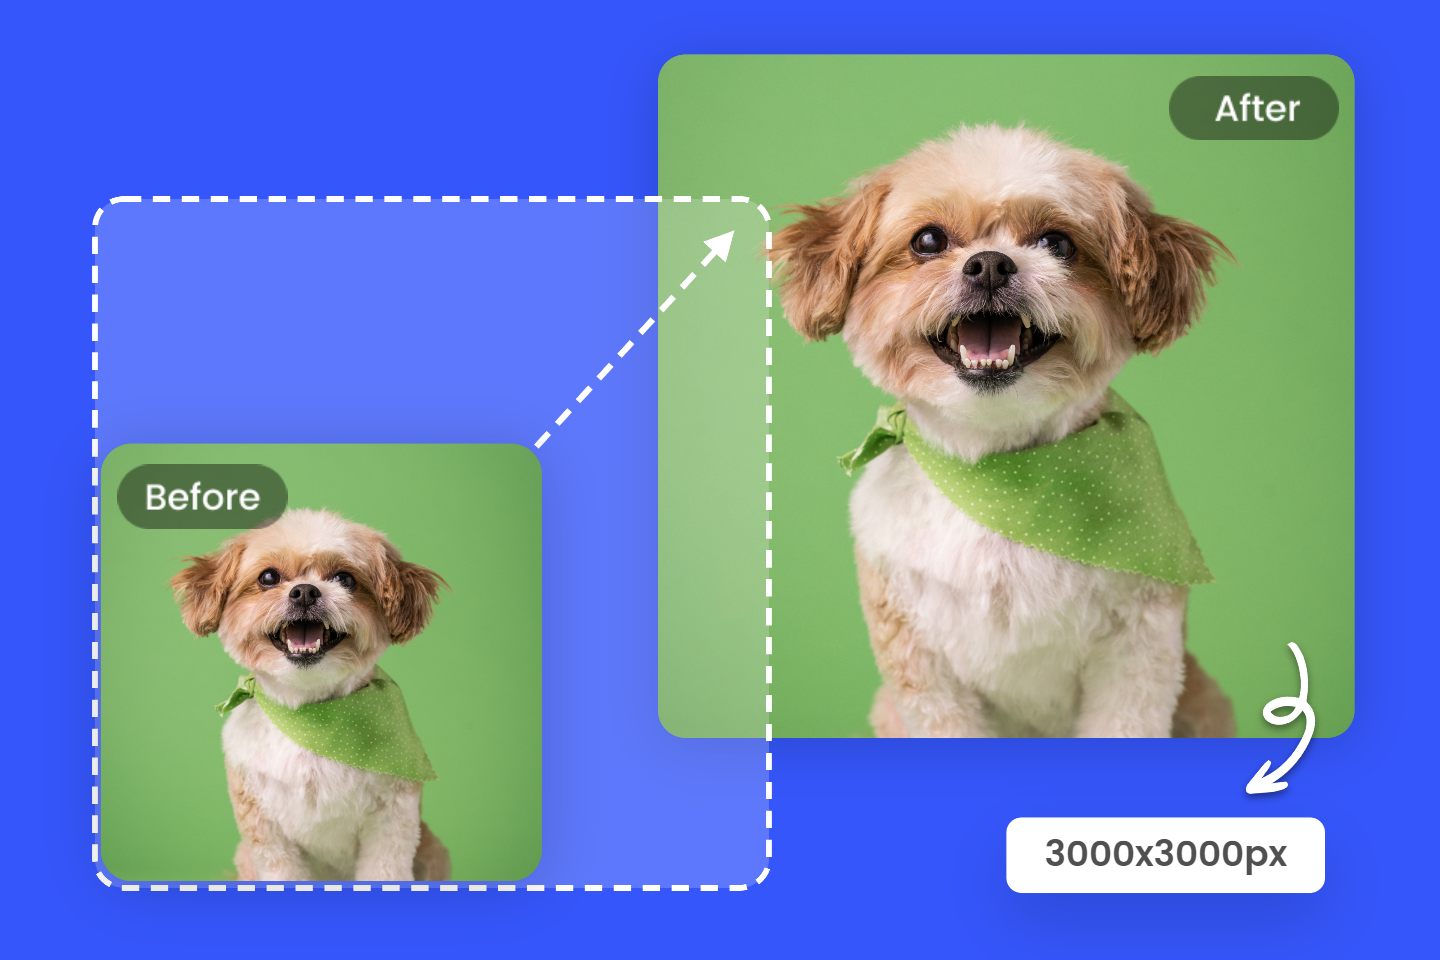 Convert a cute dog image to 3000 resolution in fotor